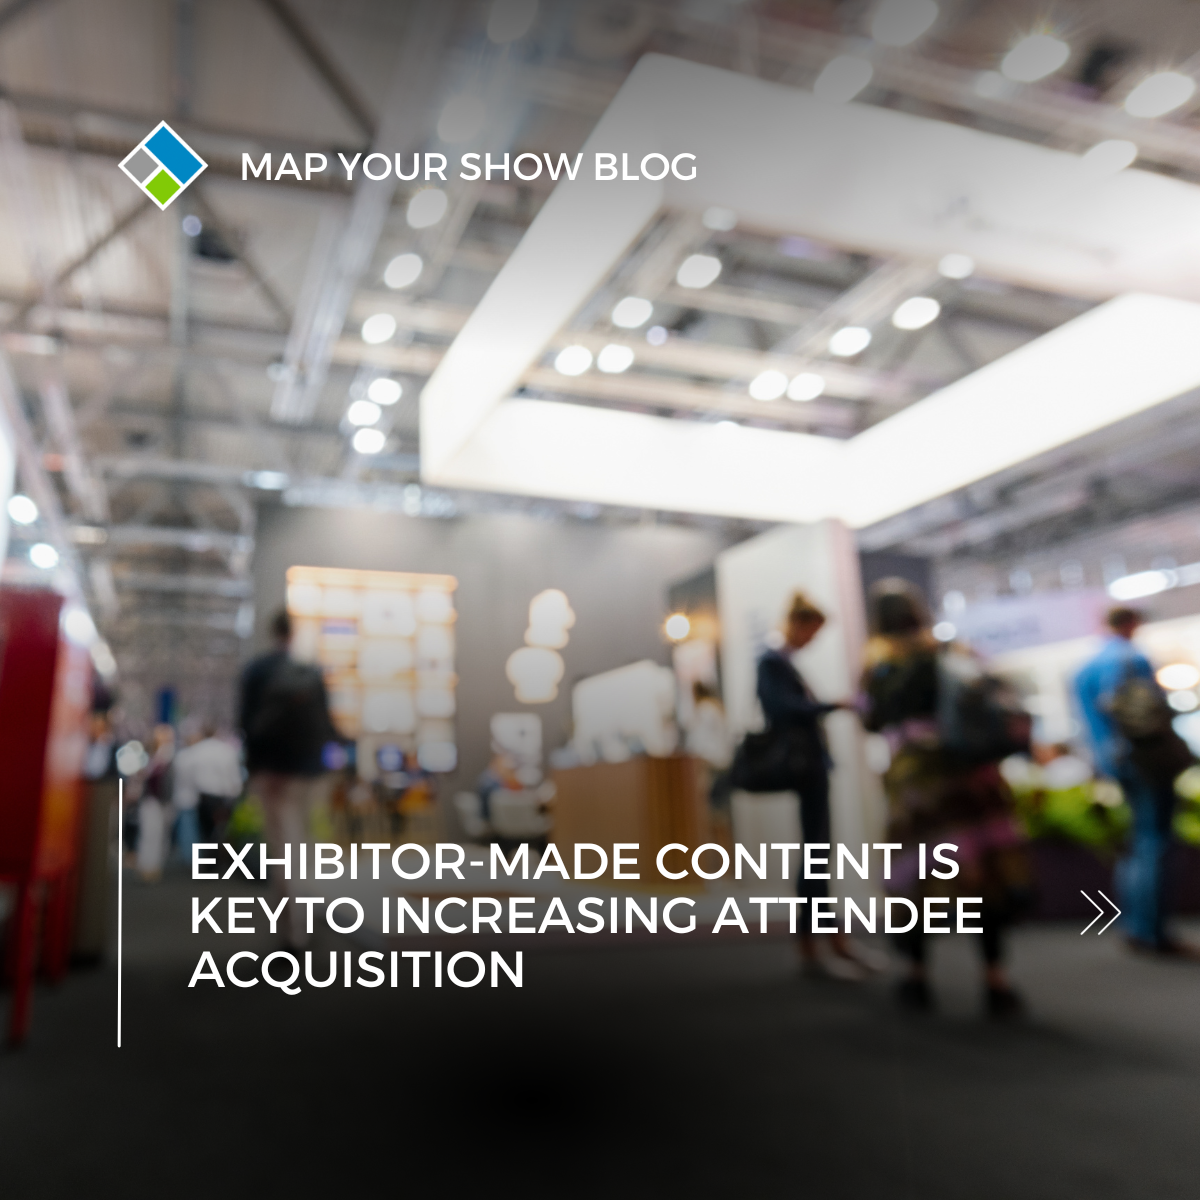 Map Your Show Blog Exhibitor-Made Content is Key to Increasing Attendee Acquisition. Image of trade show booth with exhibitors and attendees onsite.